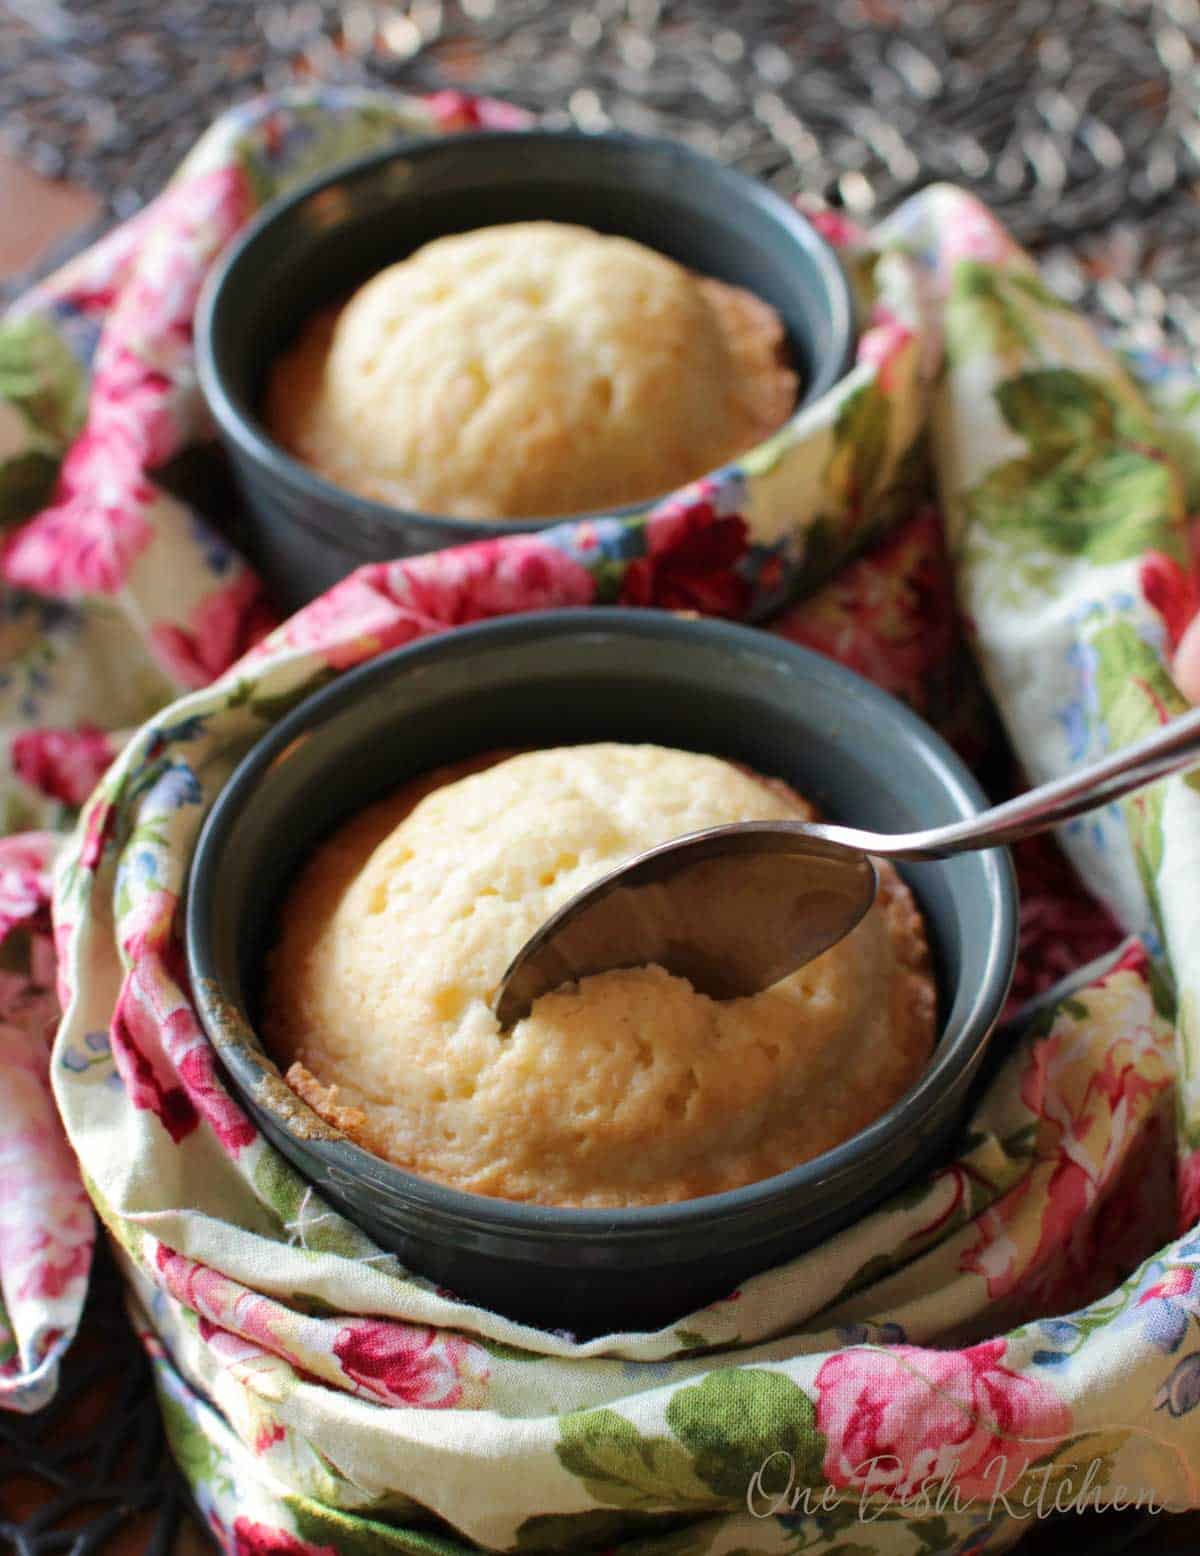 A spoon in a pound cake baked in a ramekin next to another pound cake in a ramekin all wrapped in a floral cloth napkin